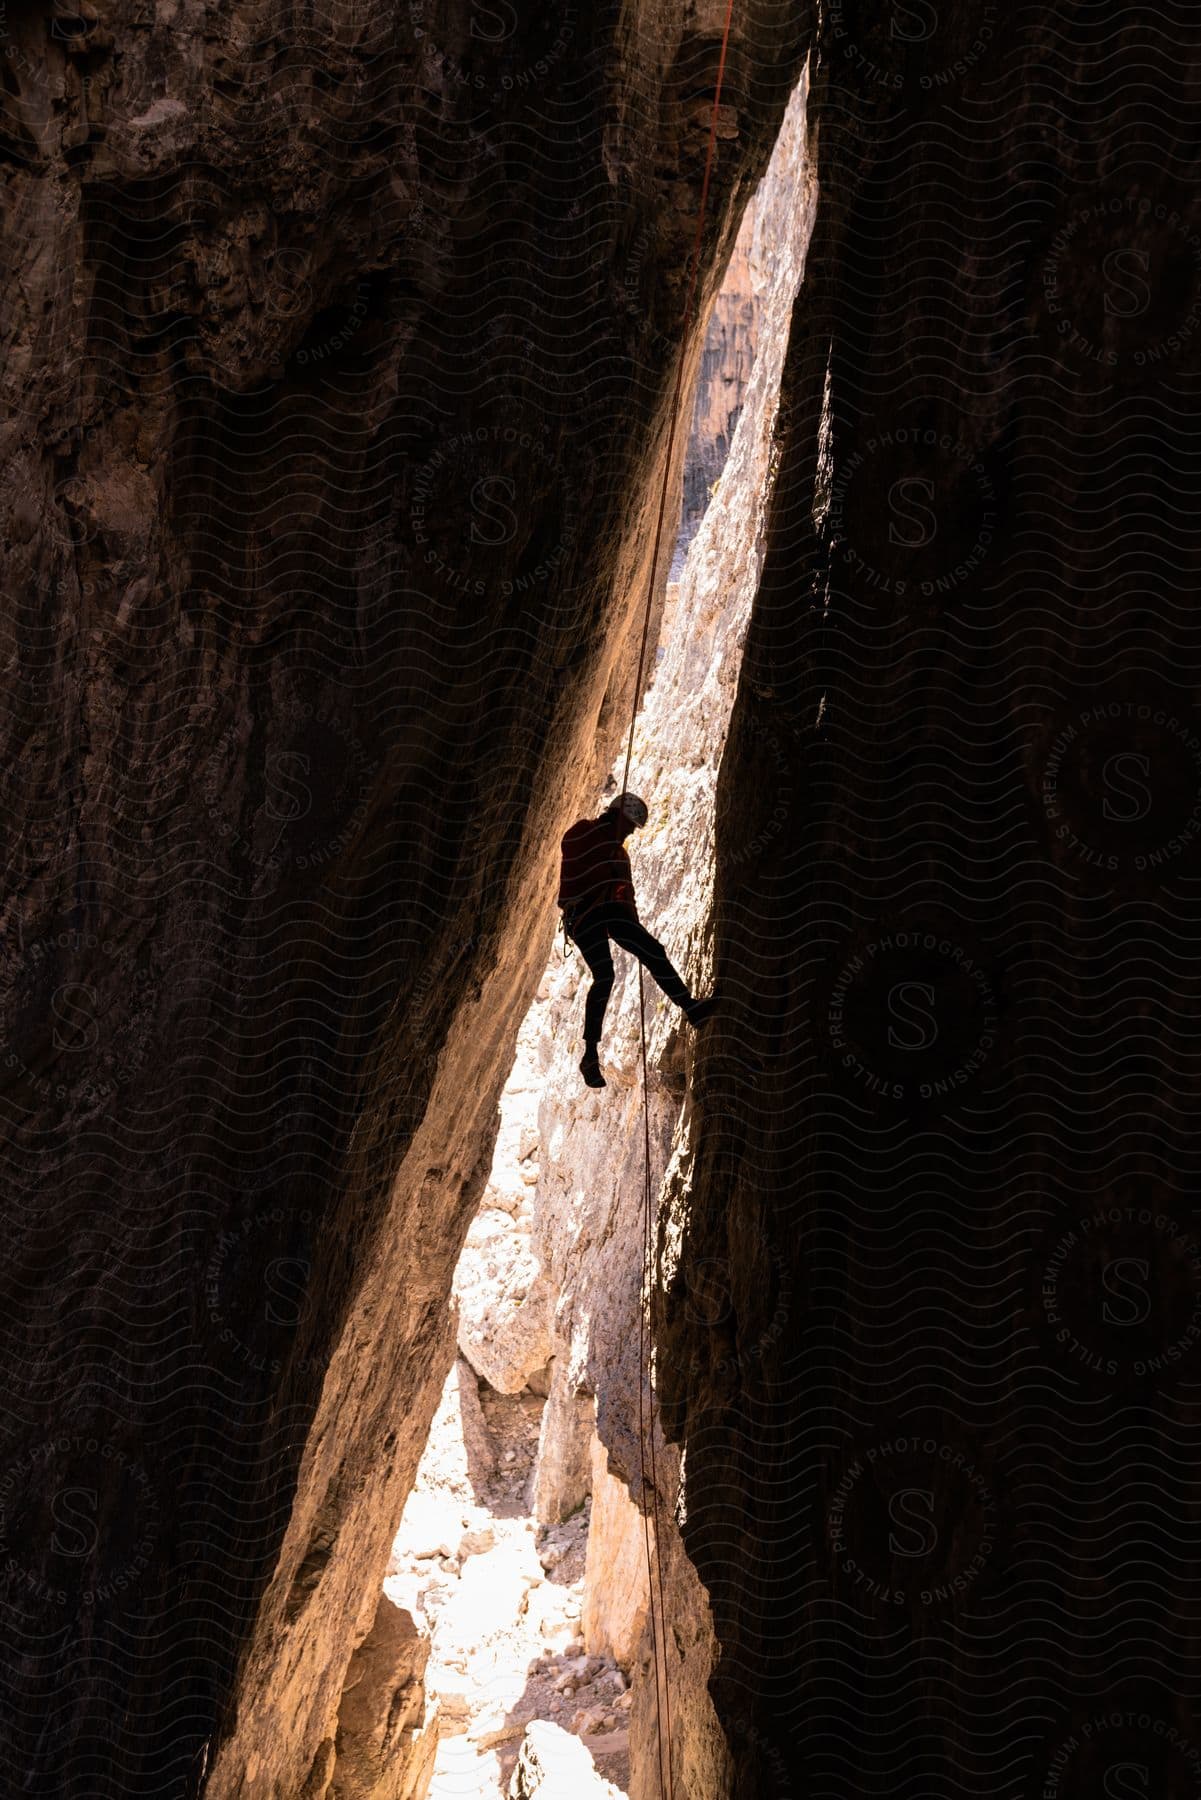 Stock photo of a rock climber hangs on a rope in a narrow cleft between two rock faces.